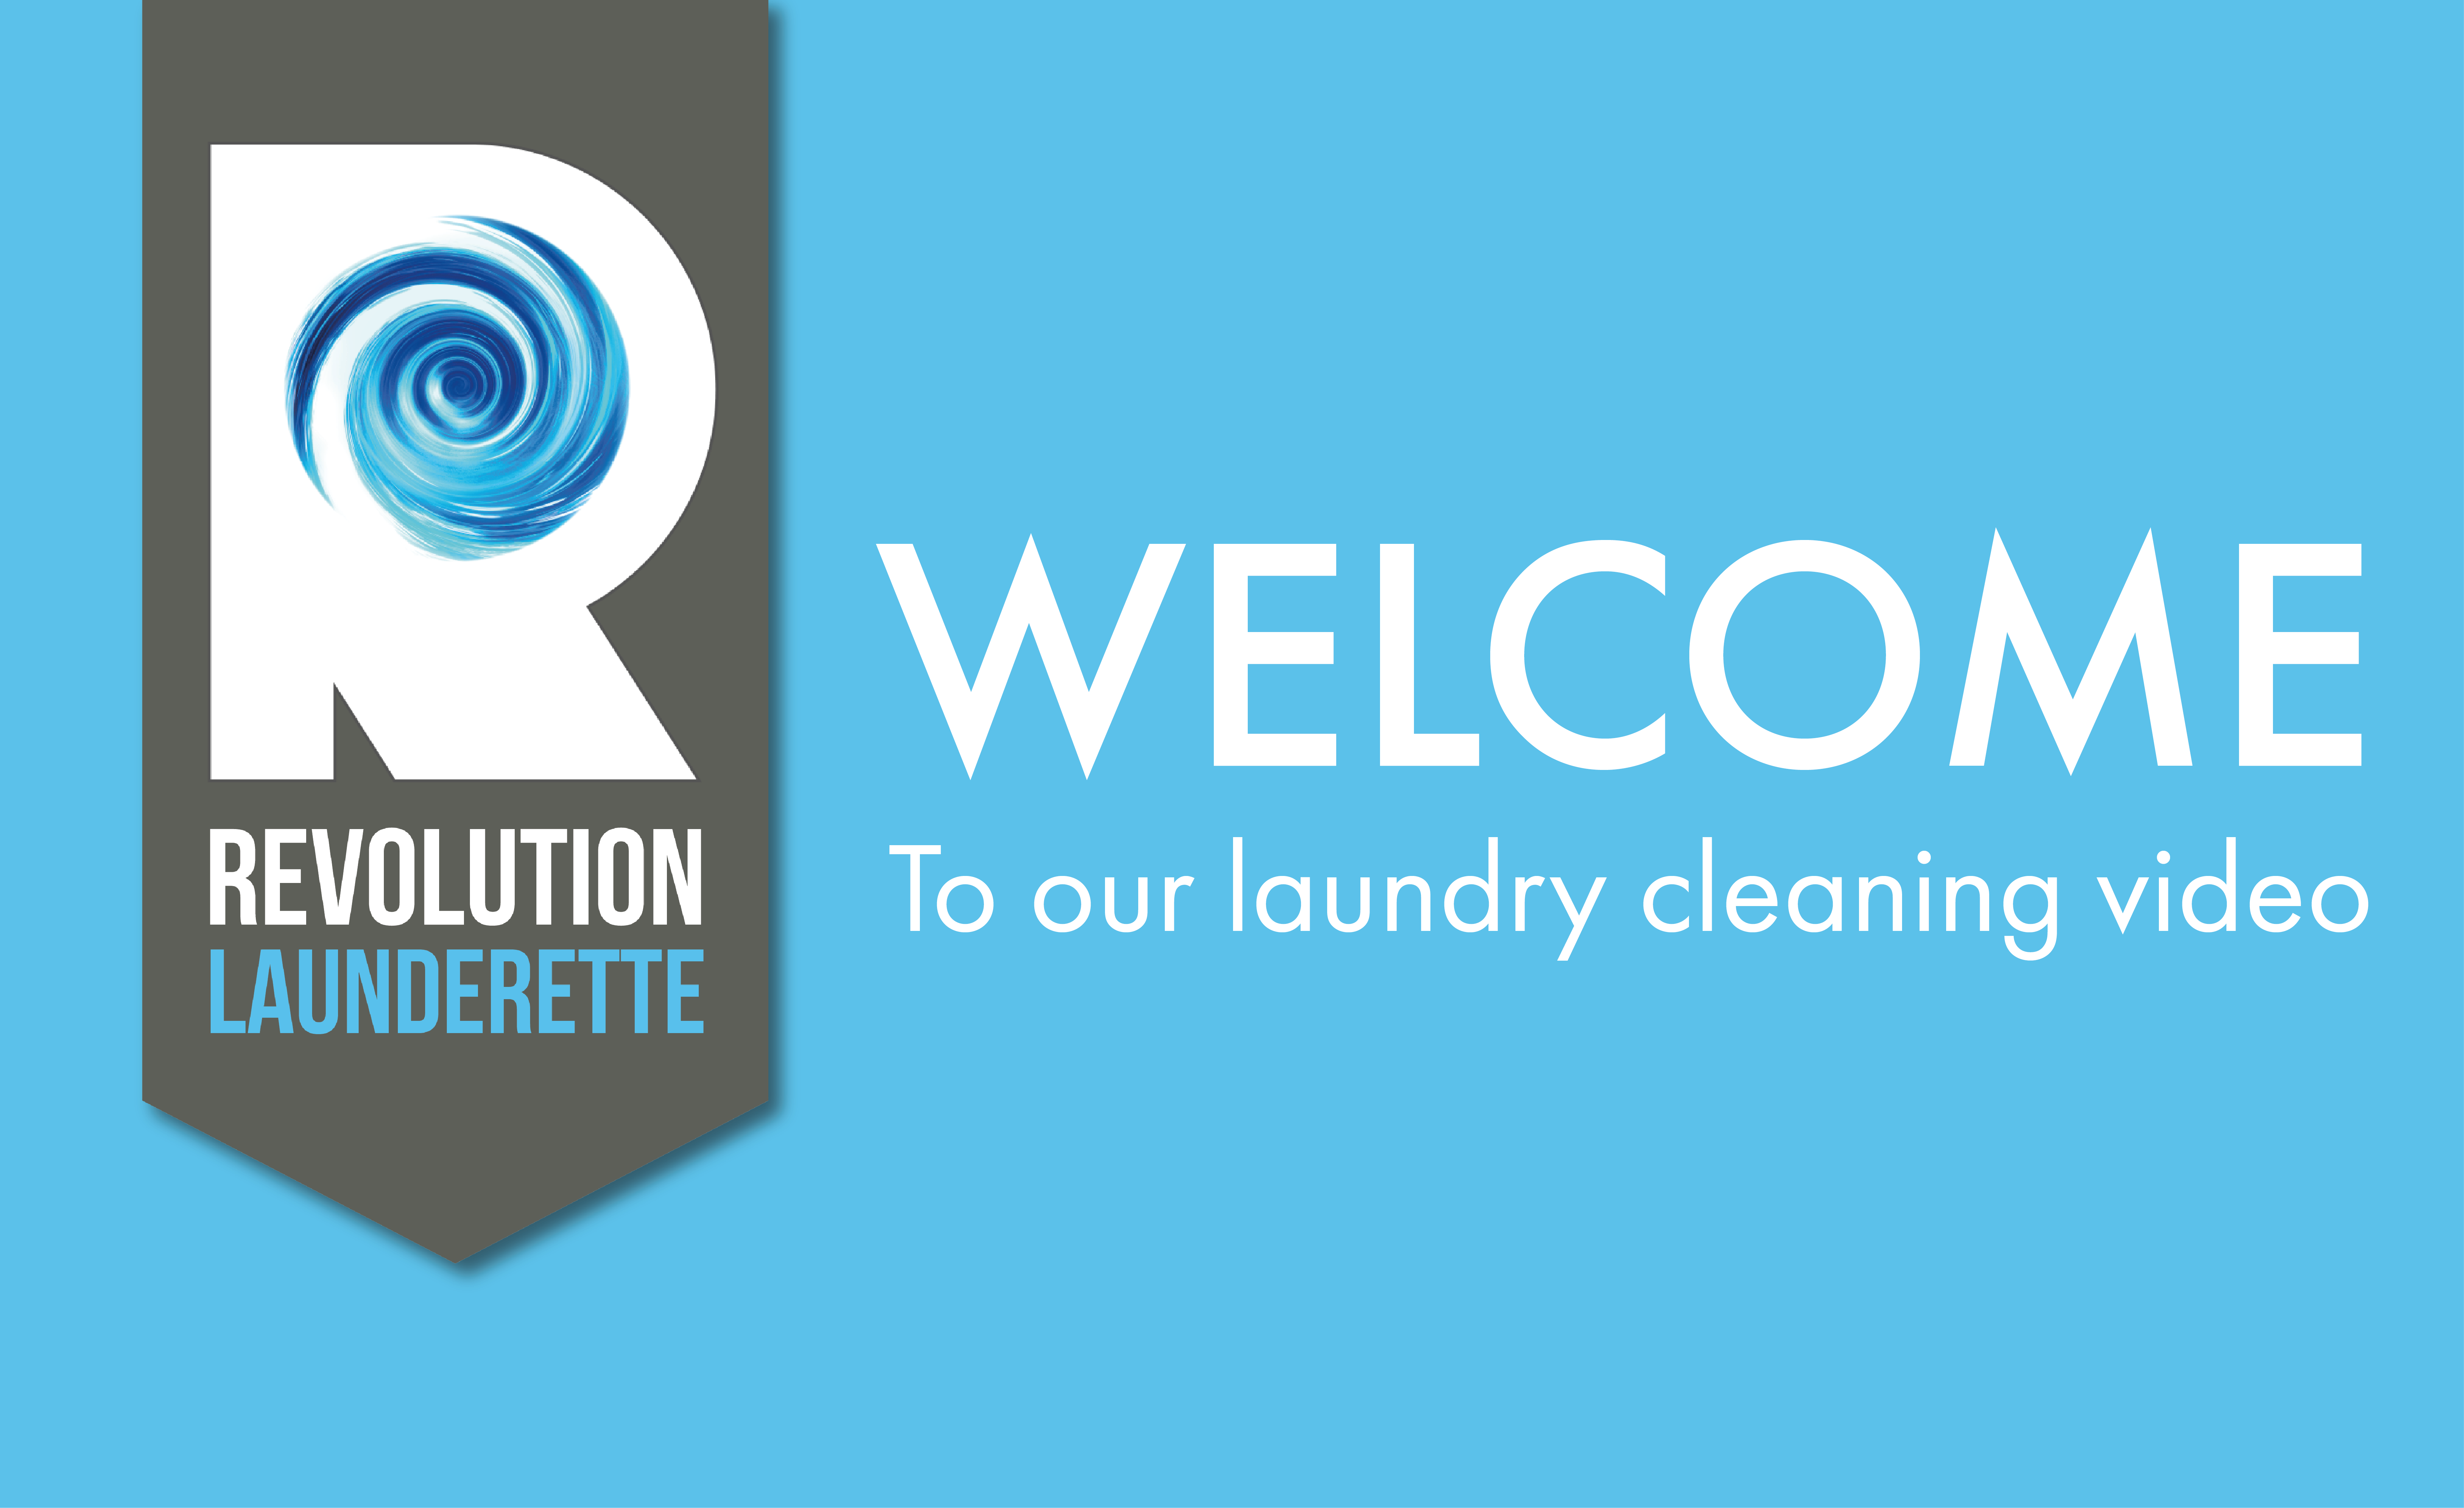 Laundry cleaning video opening slide